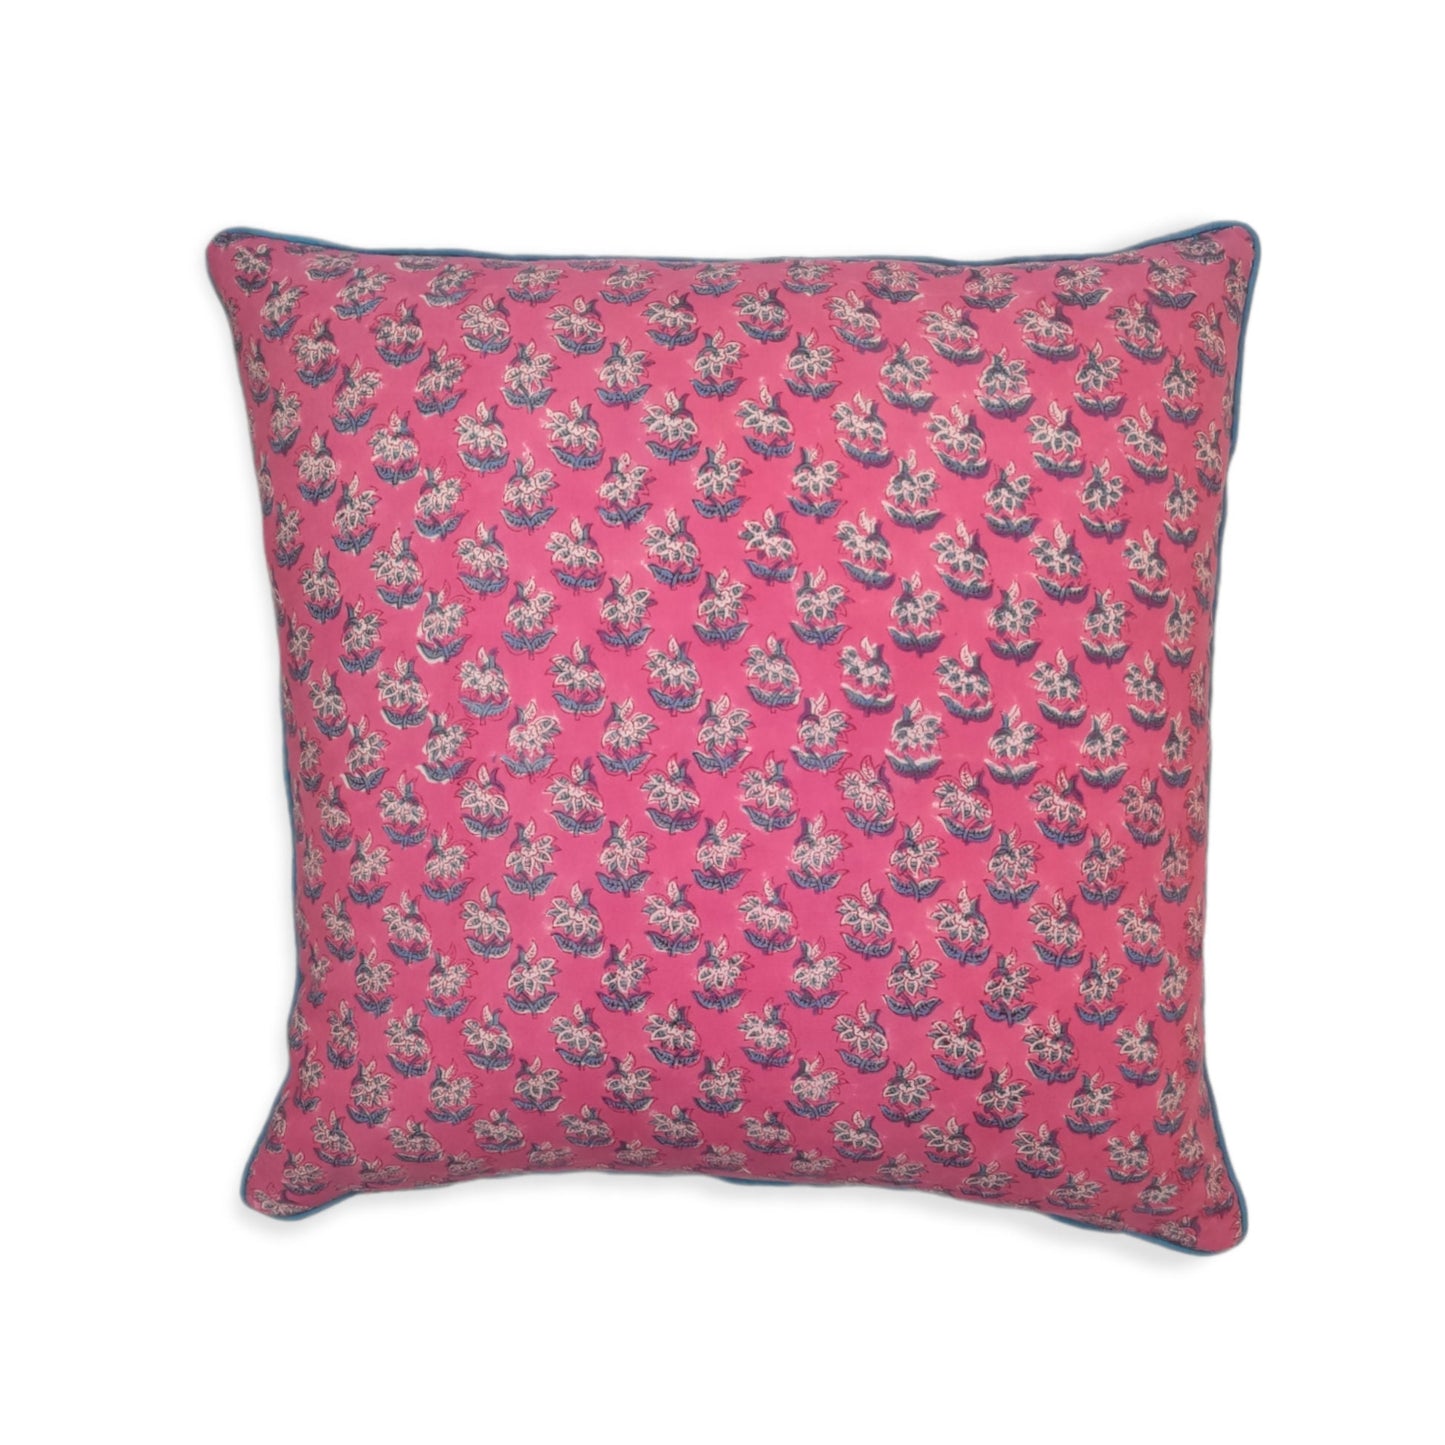 Candy Booti Piped Hand Block Printed Cotton Cushion